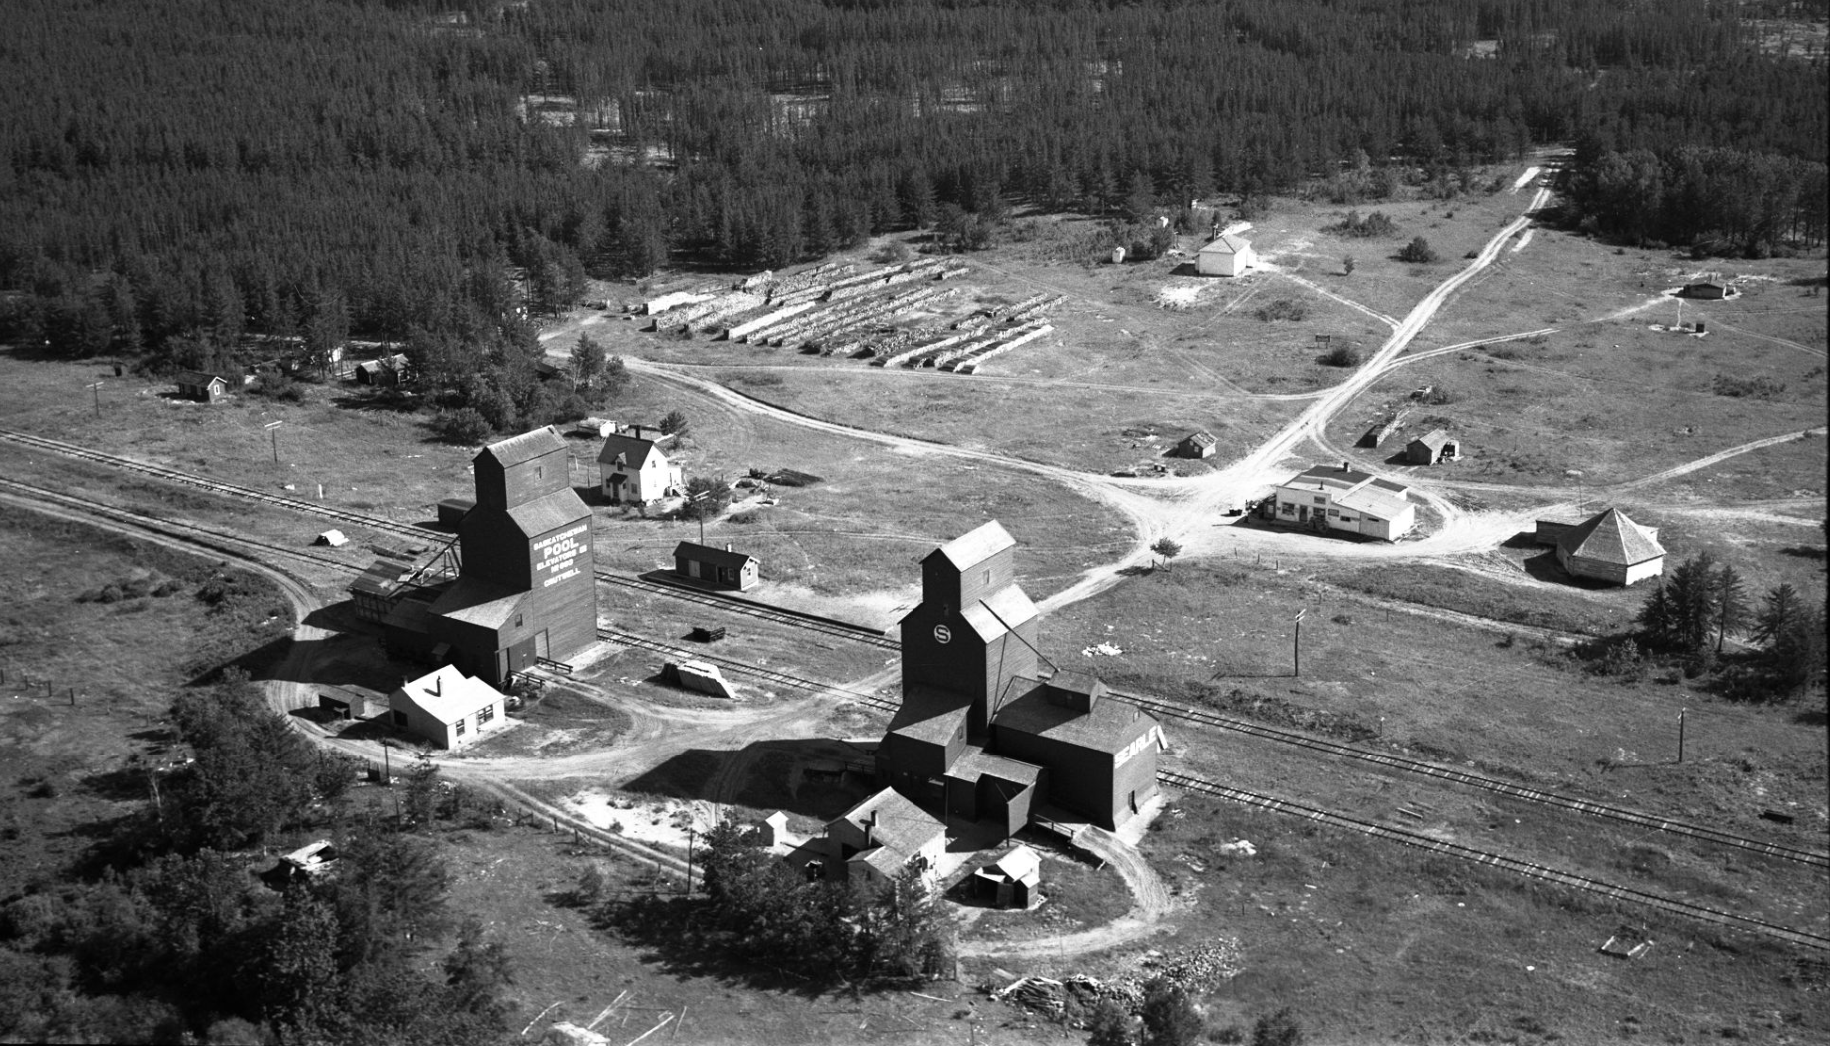 Aerial photo of Crutwell, SK, 1950s by H.D. McPhail. Credit: University of Saskatchewan, University Archives and Special Collections, MG402, Town Series 2, Box 2, 180.